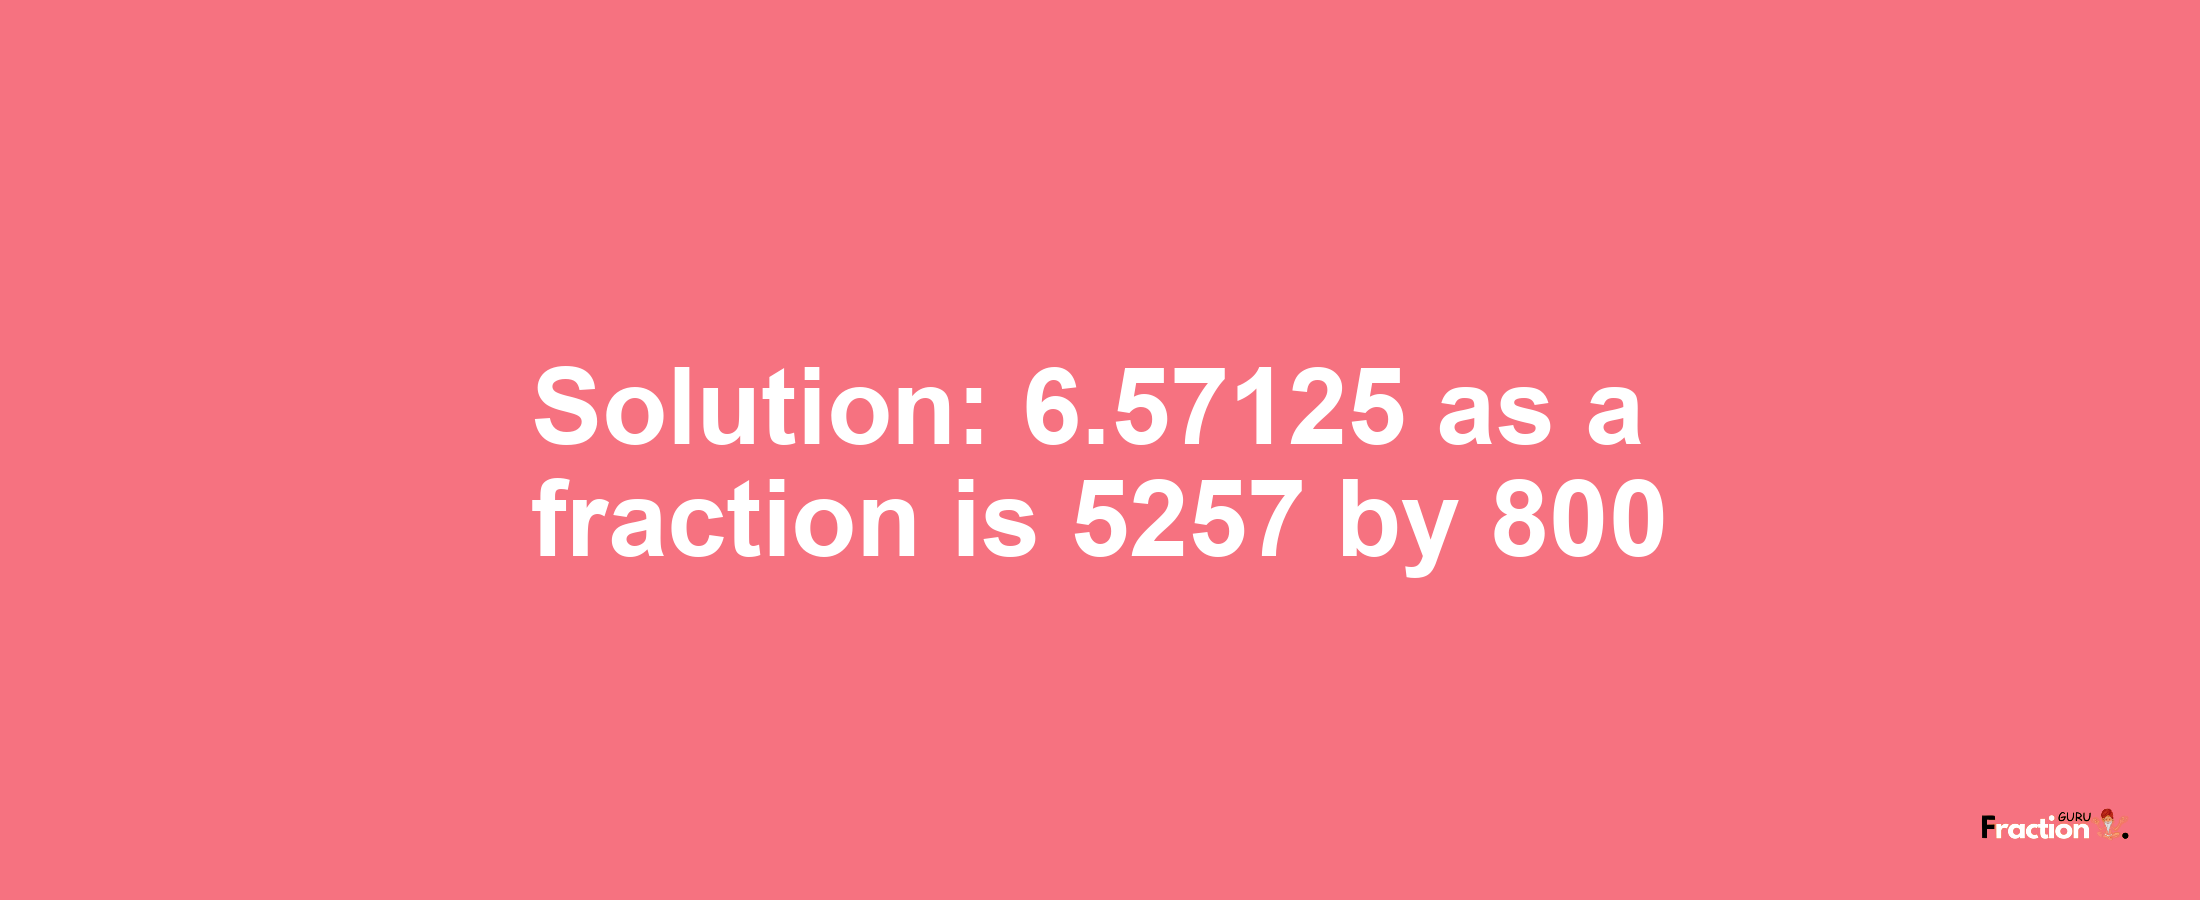 Solution:6.57125 as a fraction is 5257/800